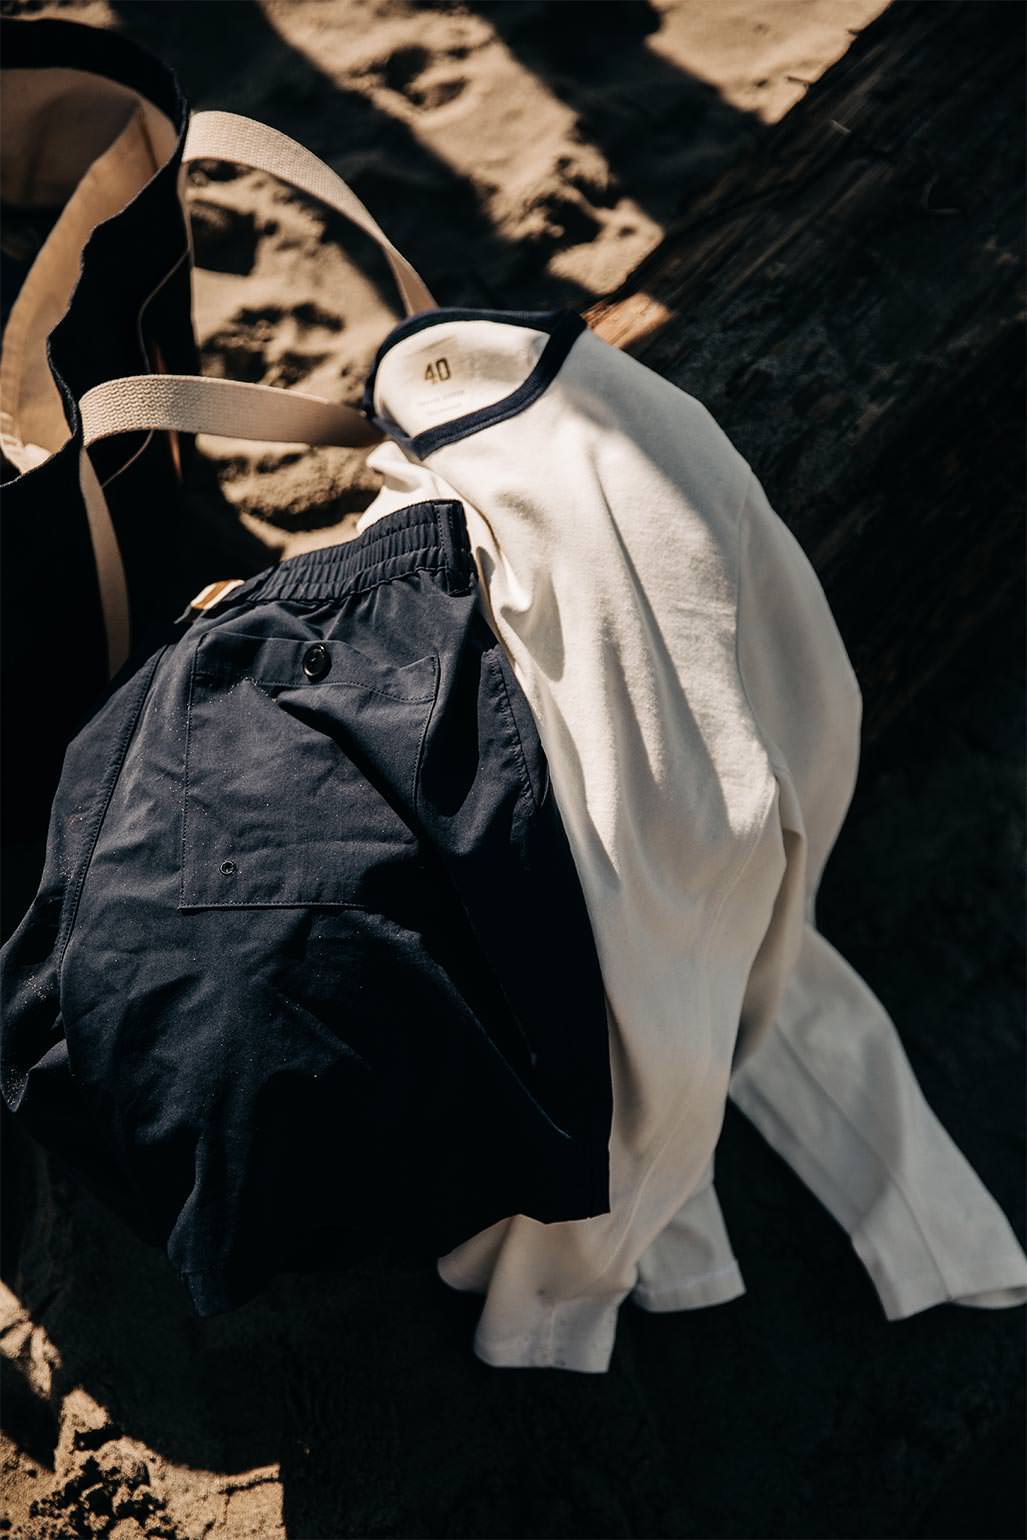 A Run-In With Tracksmith - Classic Men’s Clothing | TS…